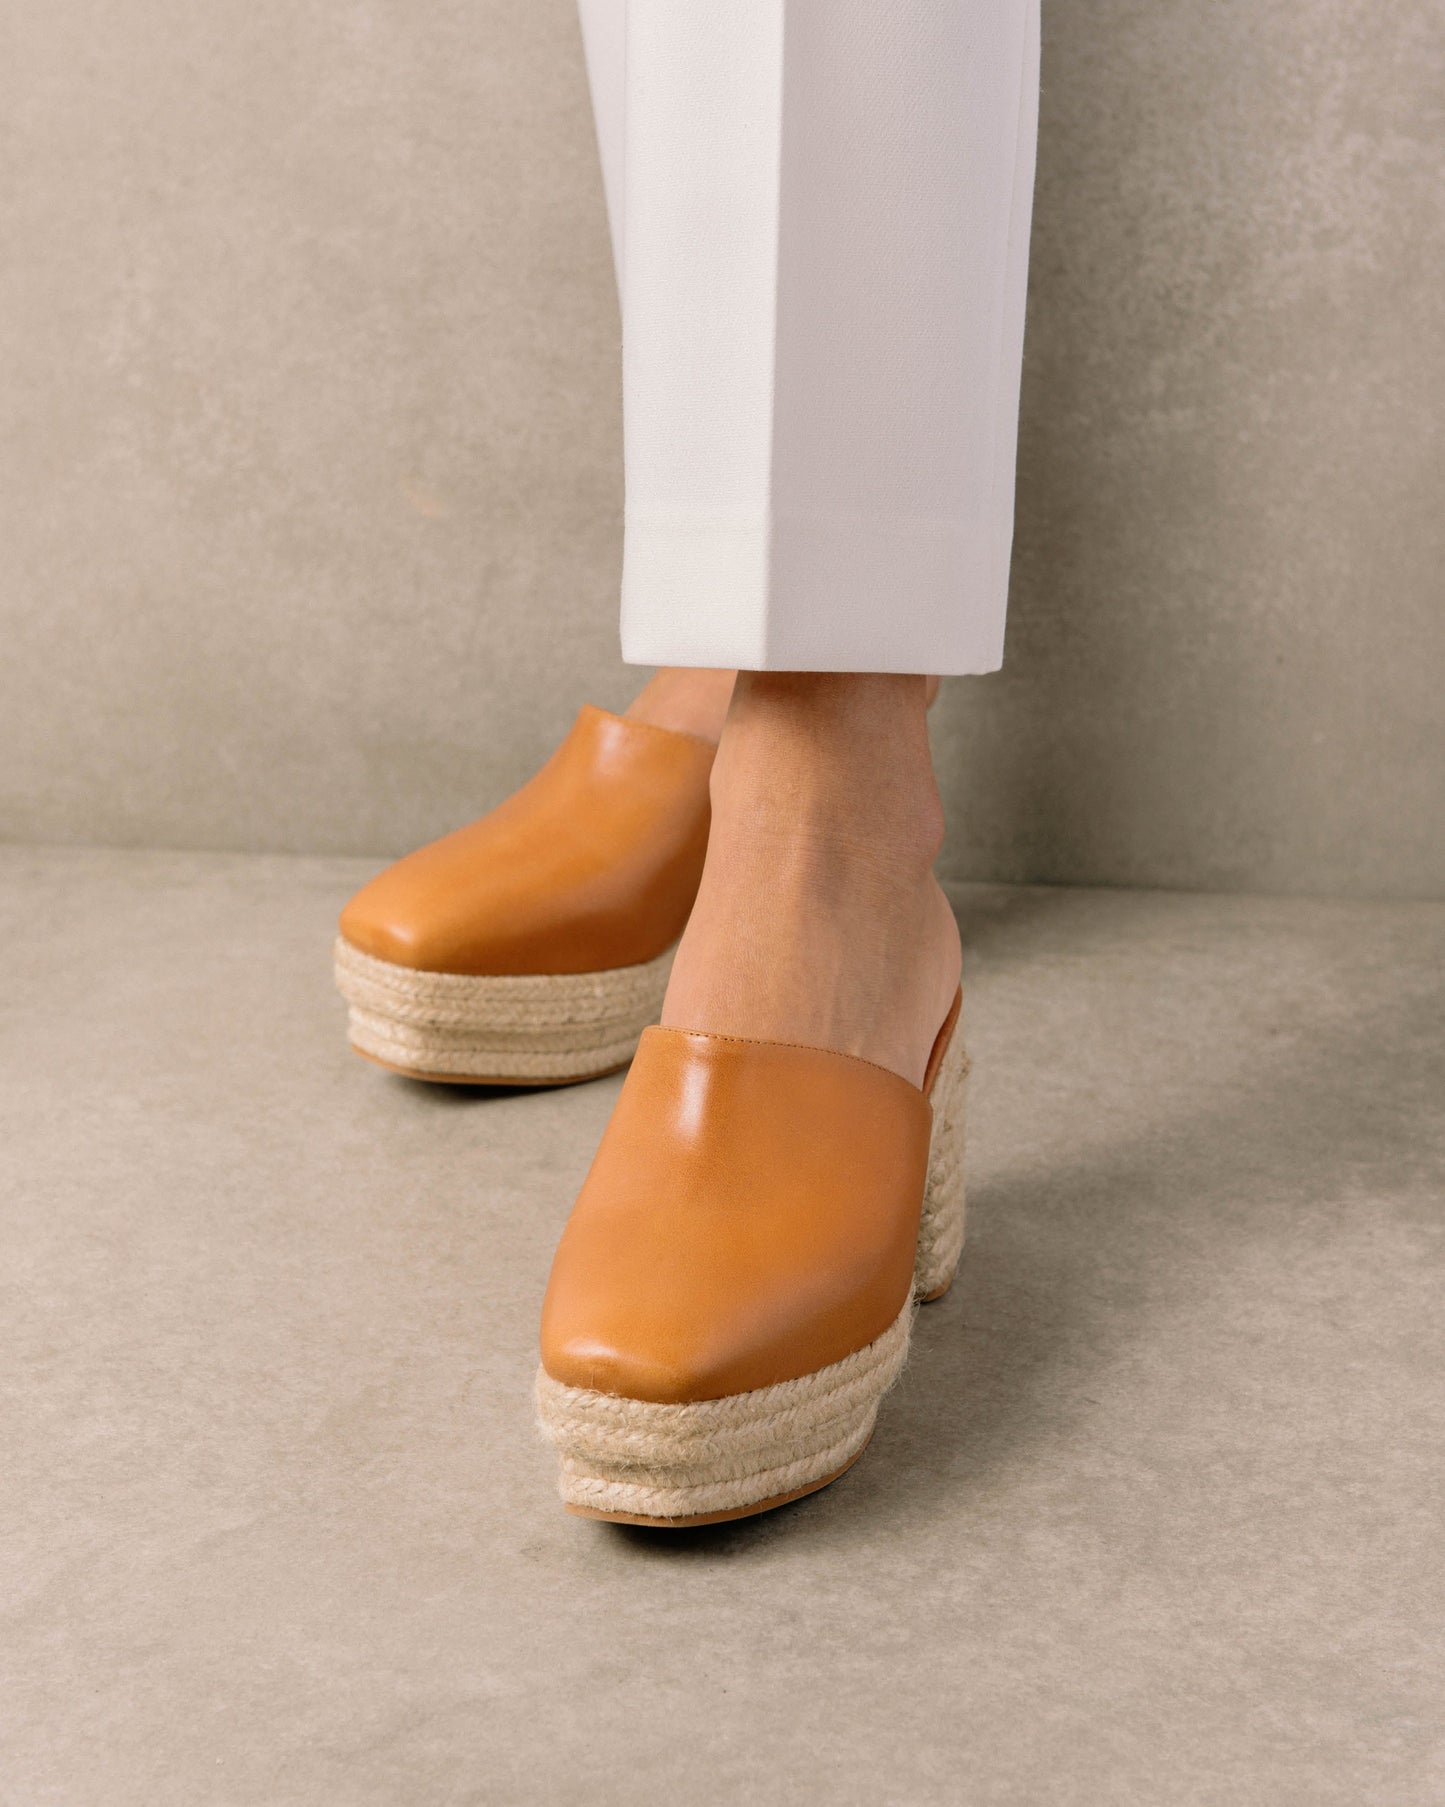 Clog style leather espadrilles with a closed toe and a sultry summer heel. Sustainably made in Spain.